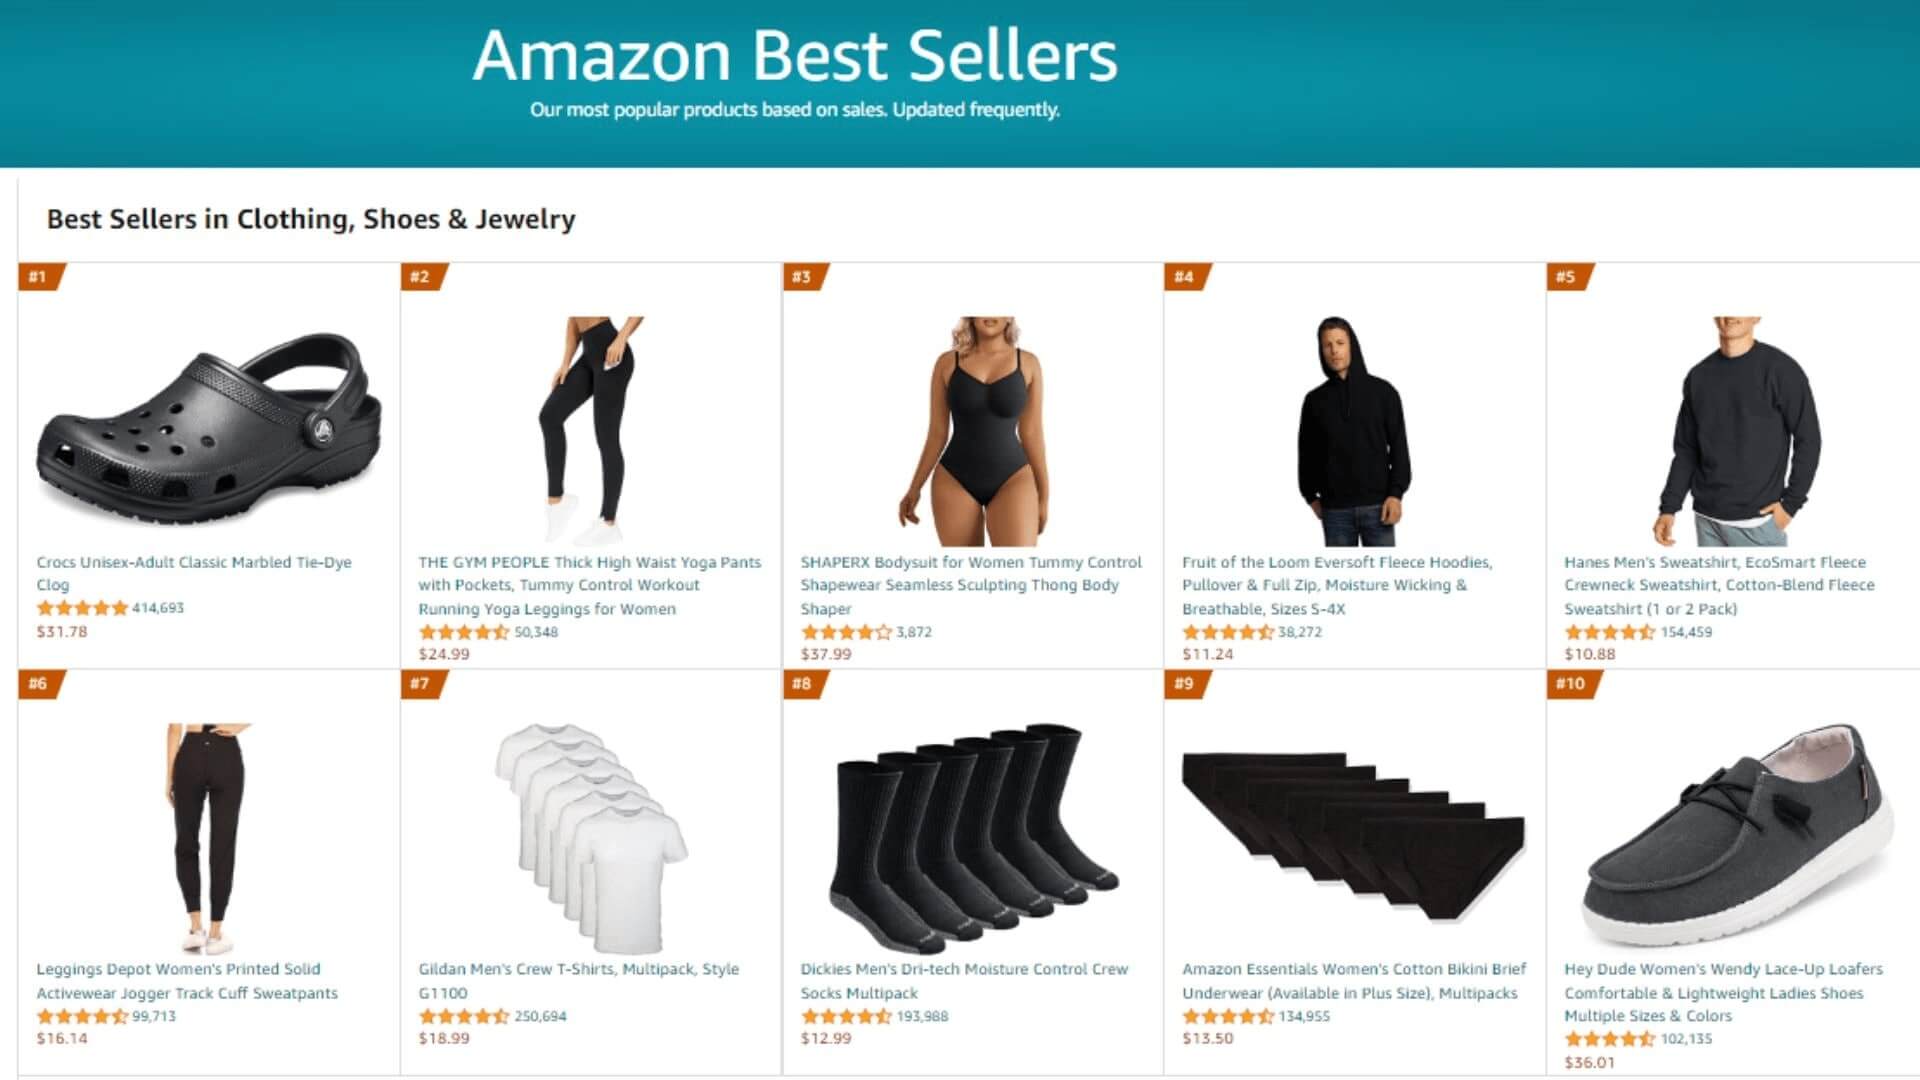 Amazon's best sellers page